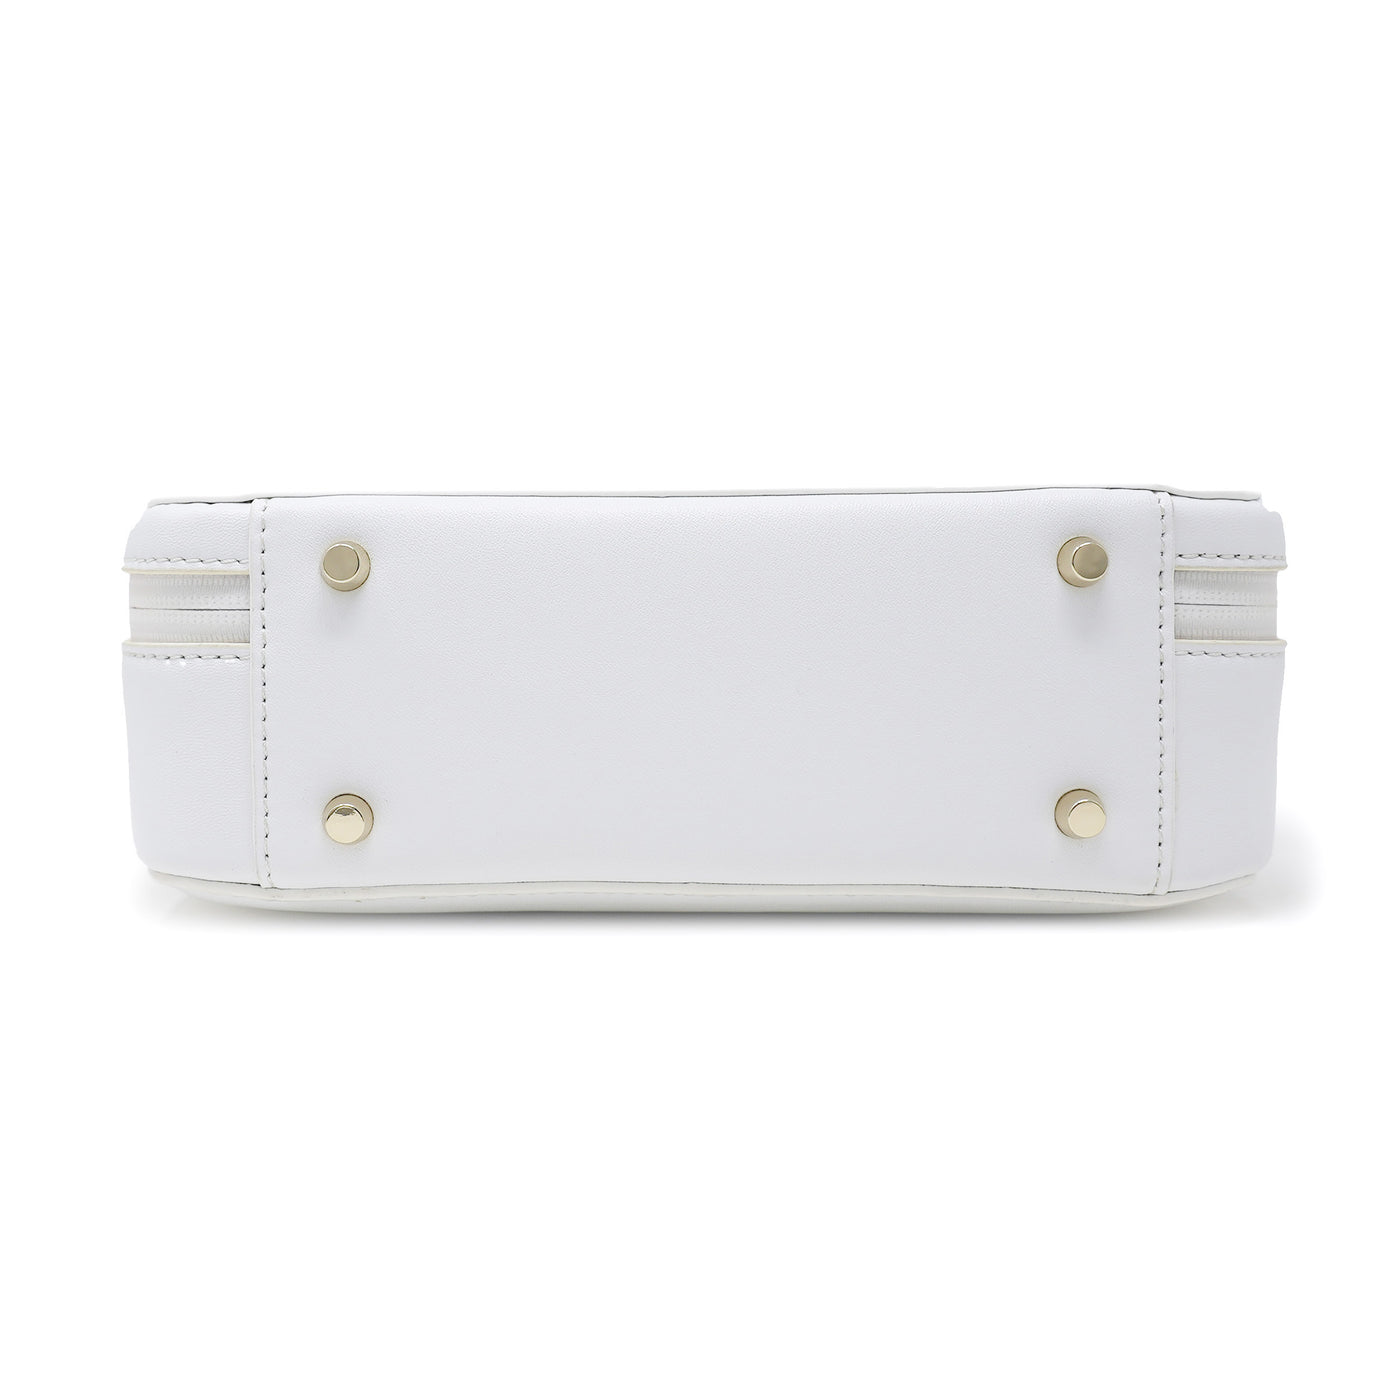 Anti-theft Water-resistant Travel Crossbody - Elise Crossbody in White Gold with slash-resistant faux leather & locking clasps straps - botton view - Arden Cove